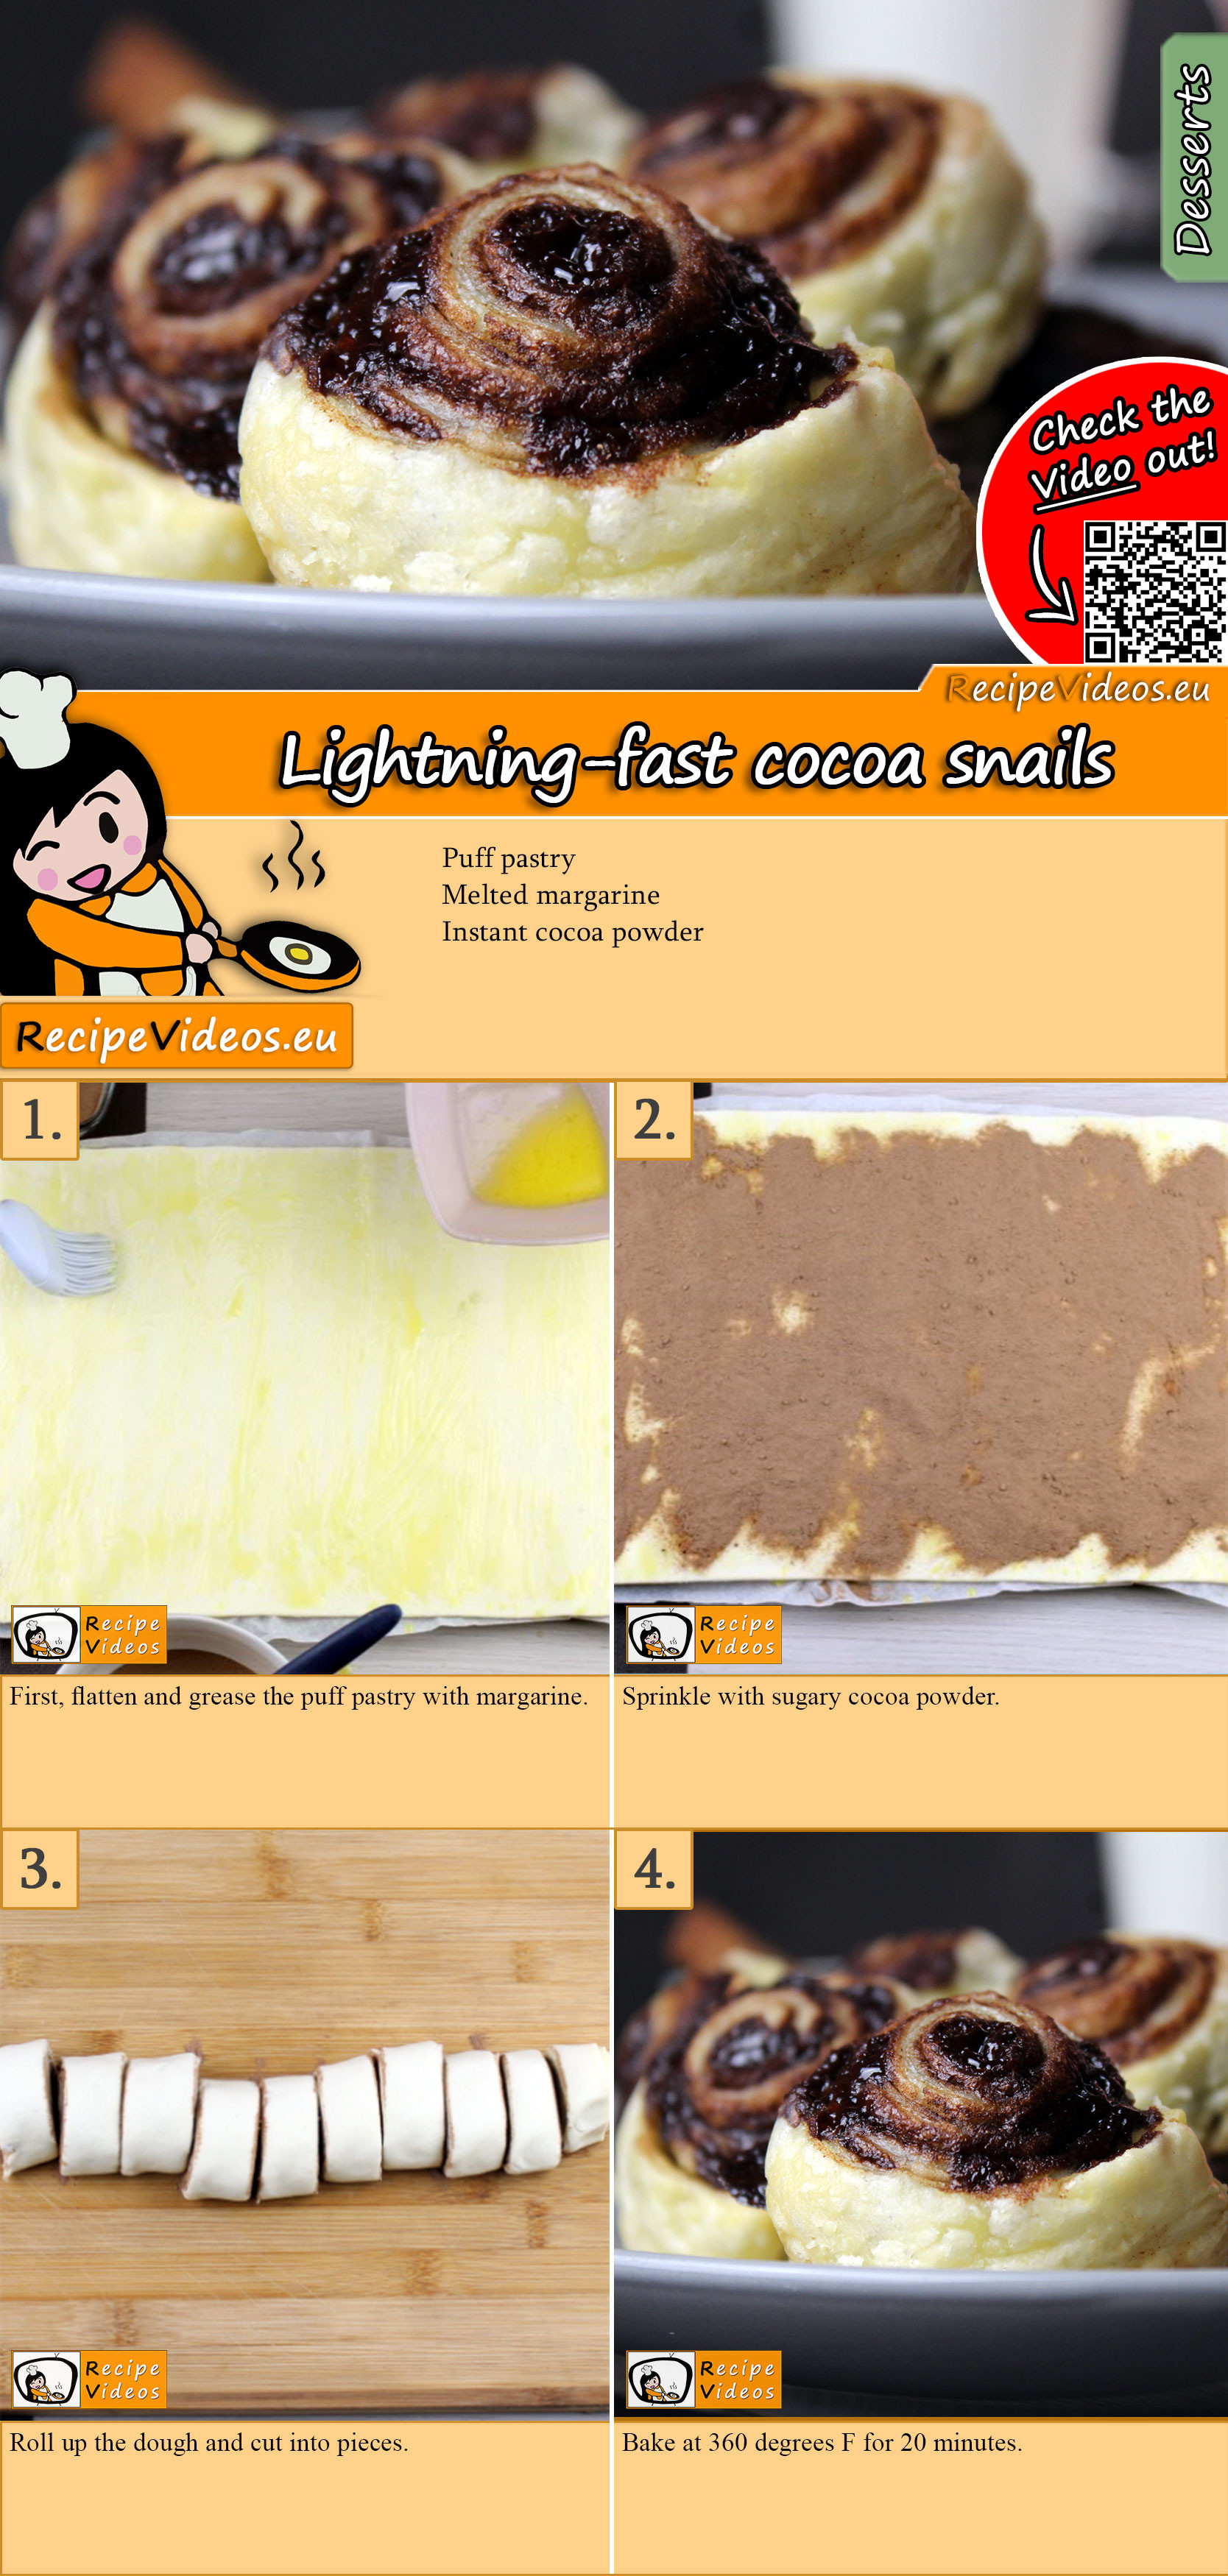 Lightning-fast cocoa snails recipe with video